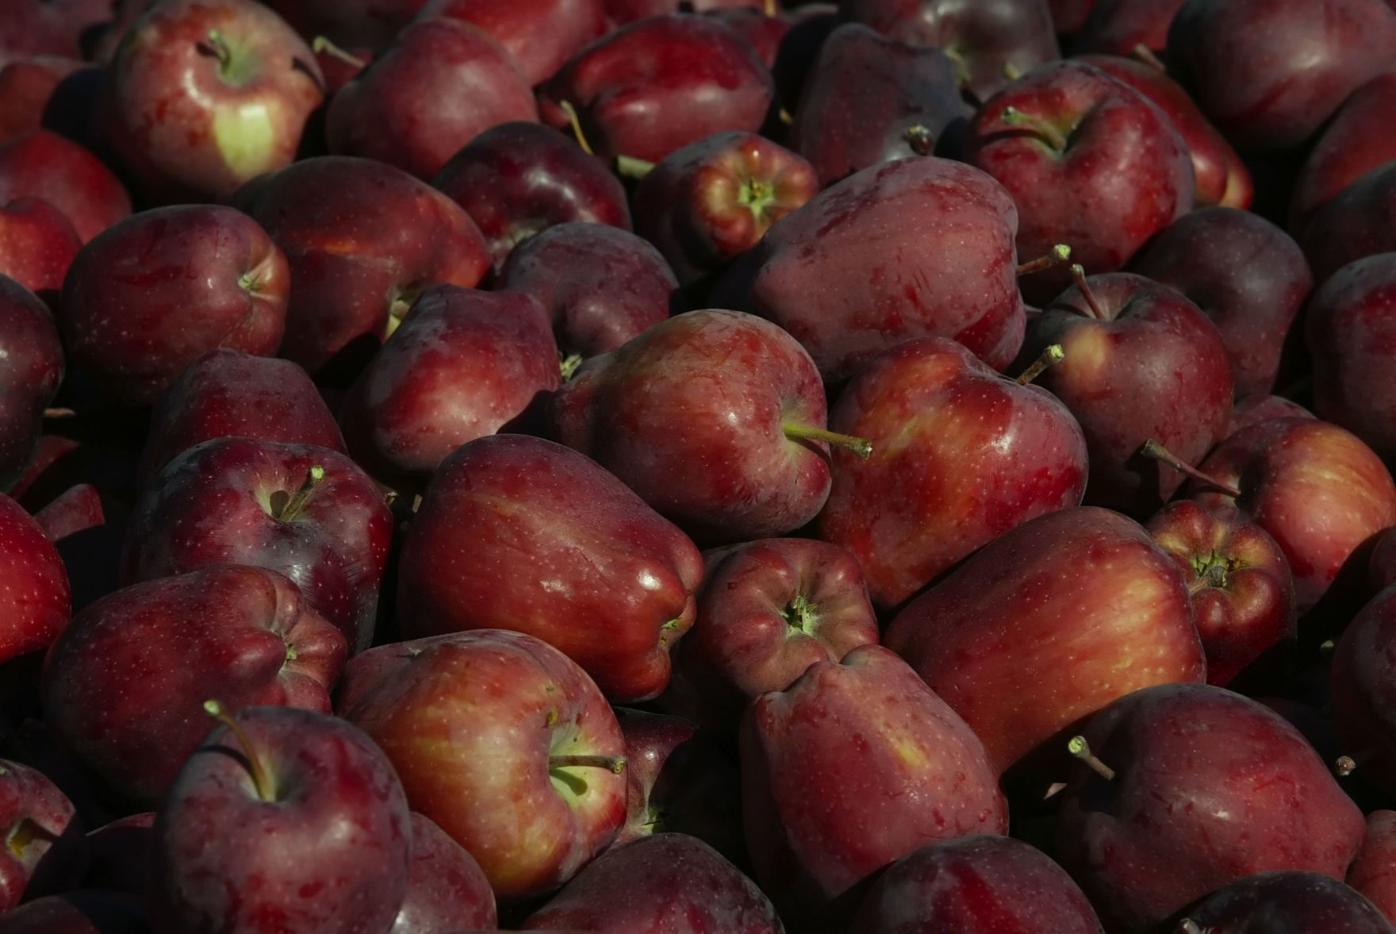 The Red Delicious Era is Over—THIS is America's New Favorite Apple